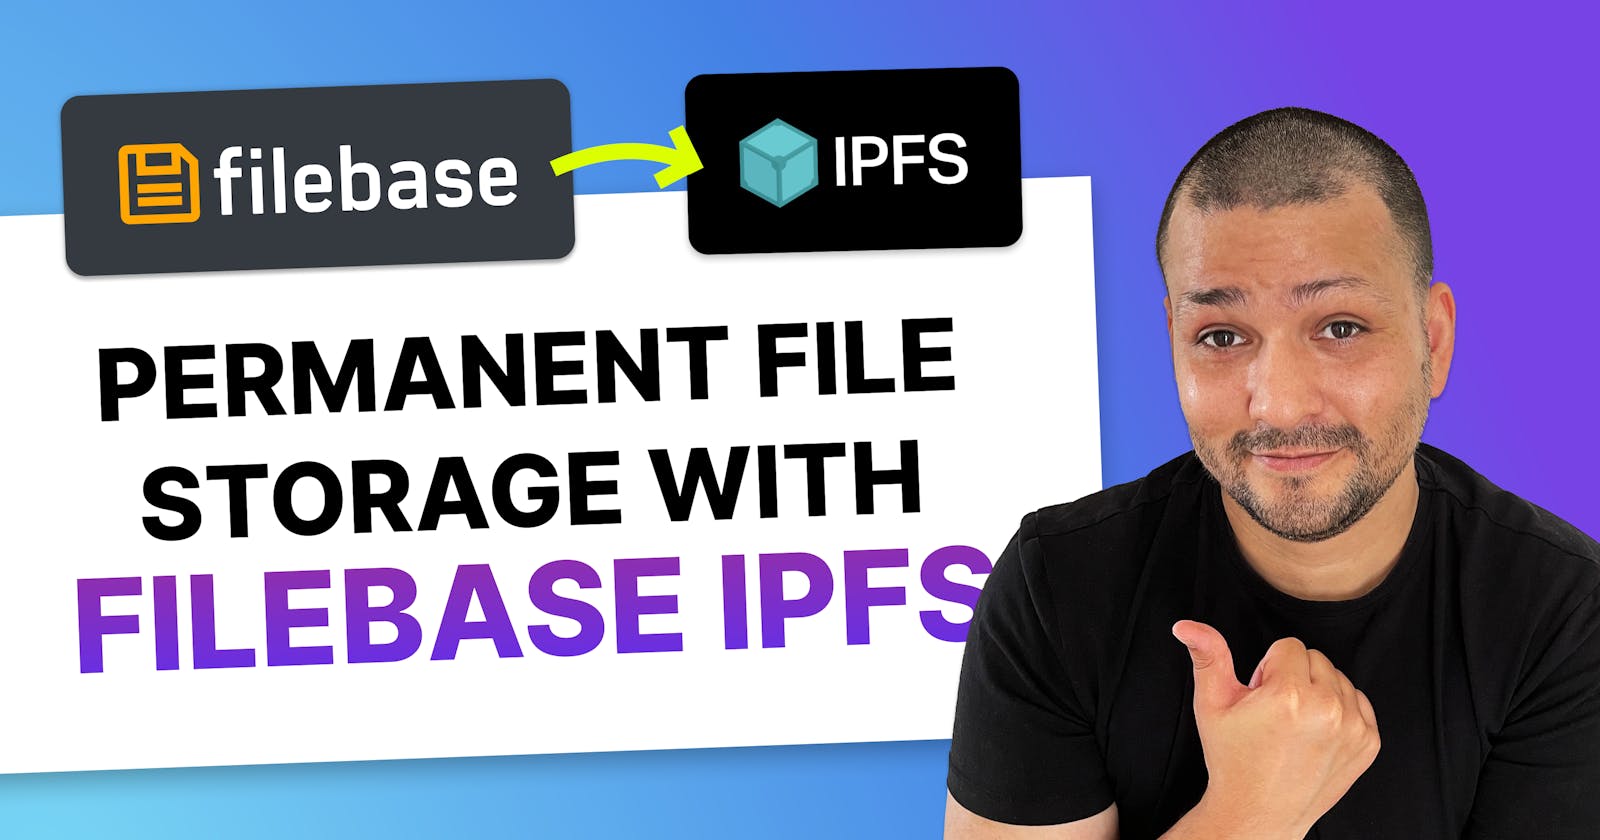 Easily Understand & Upload Files To IPFS With Filebase